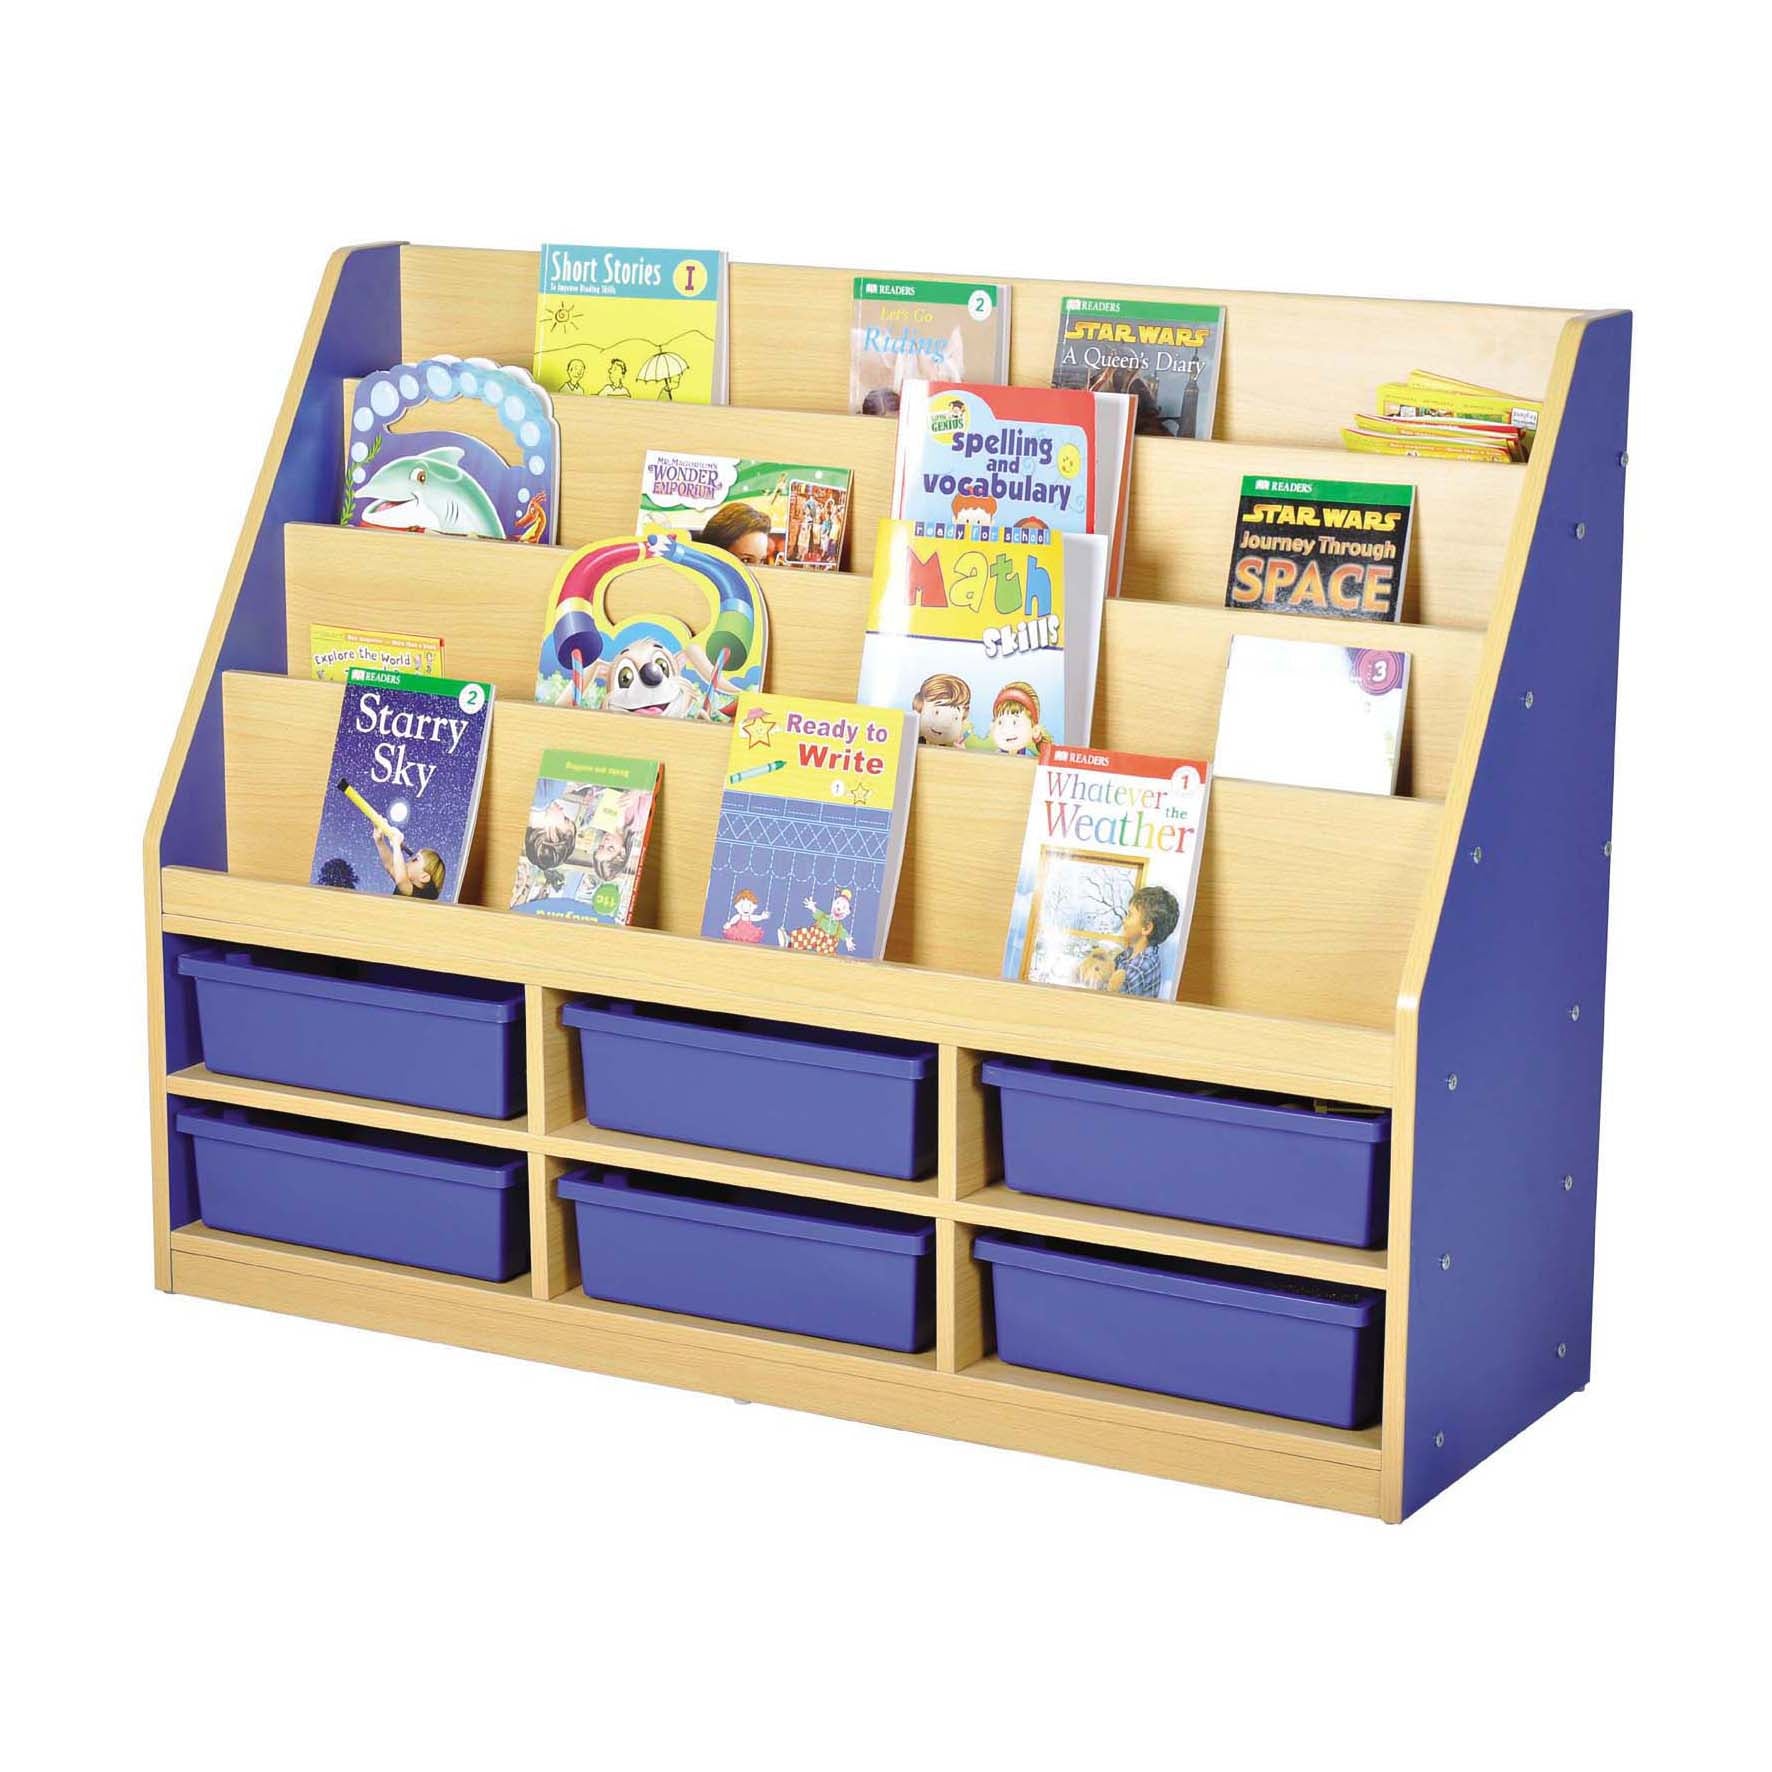 Milan Tiered Bookcase Blue – 6 Small Trays